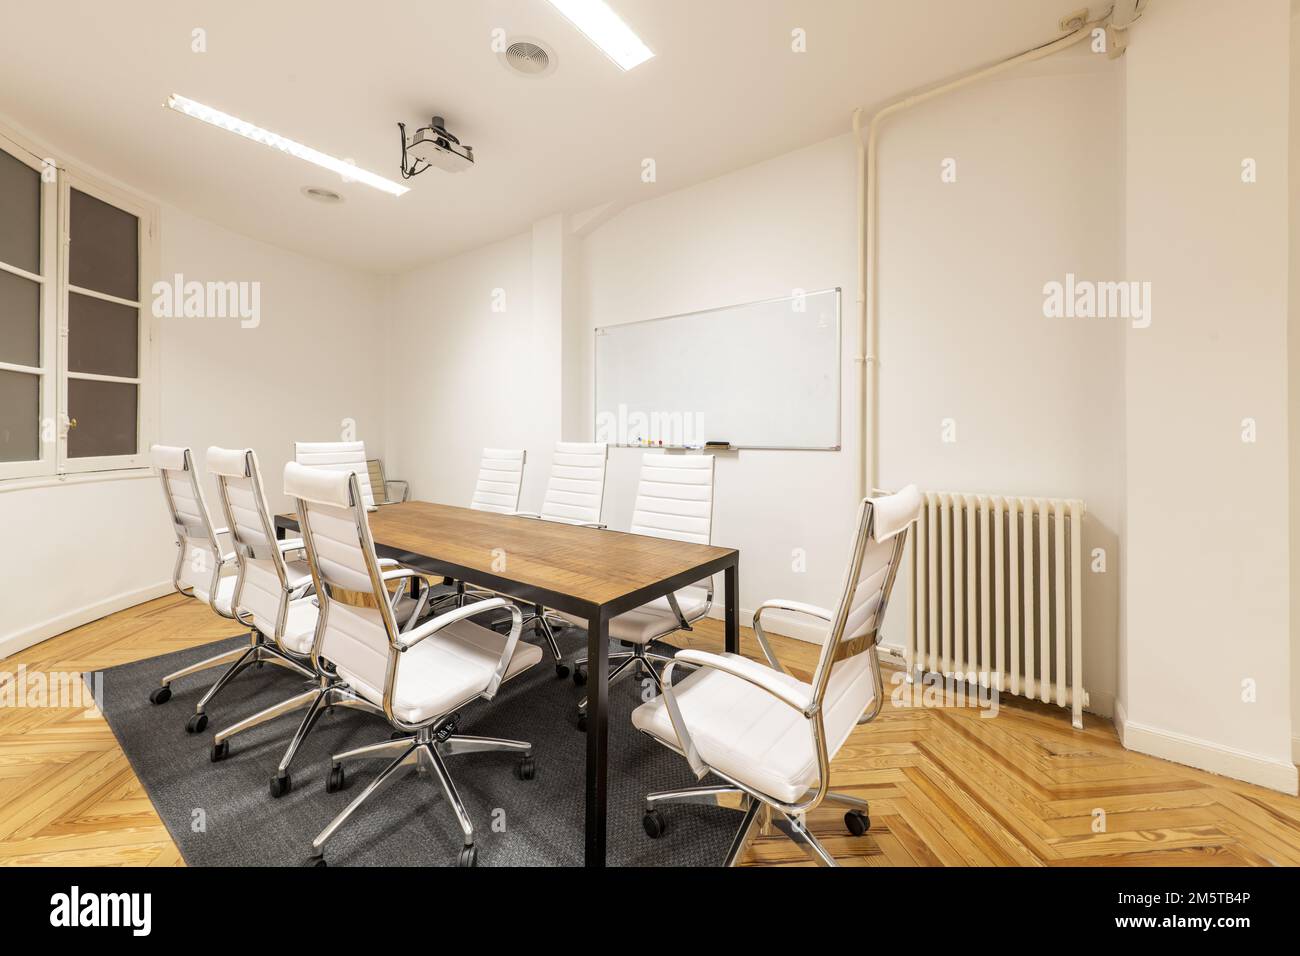 Meeting room with wooden office table with metal frame and swivel chairs upholstered in white skai, whiteboard for erasable markers and projector on t Stock Photo